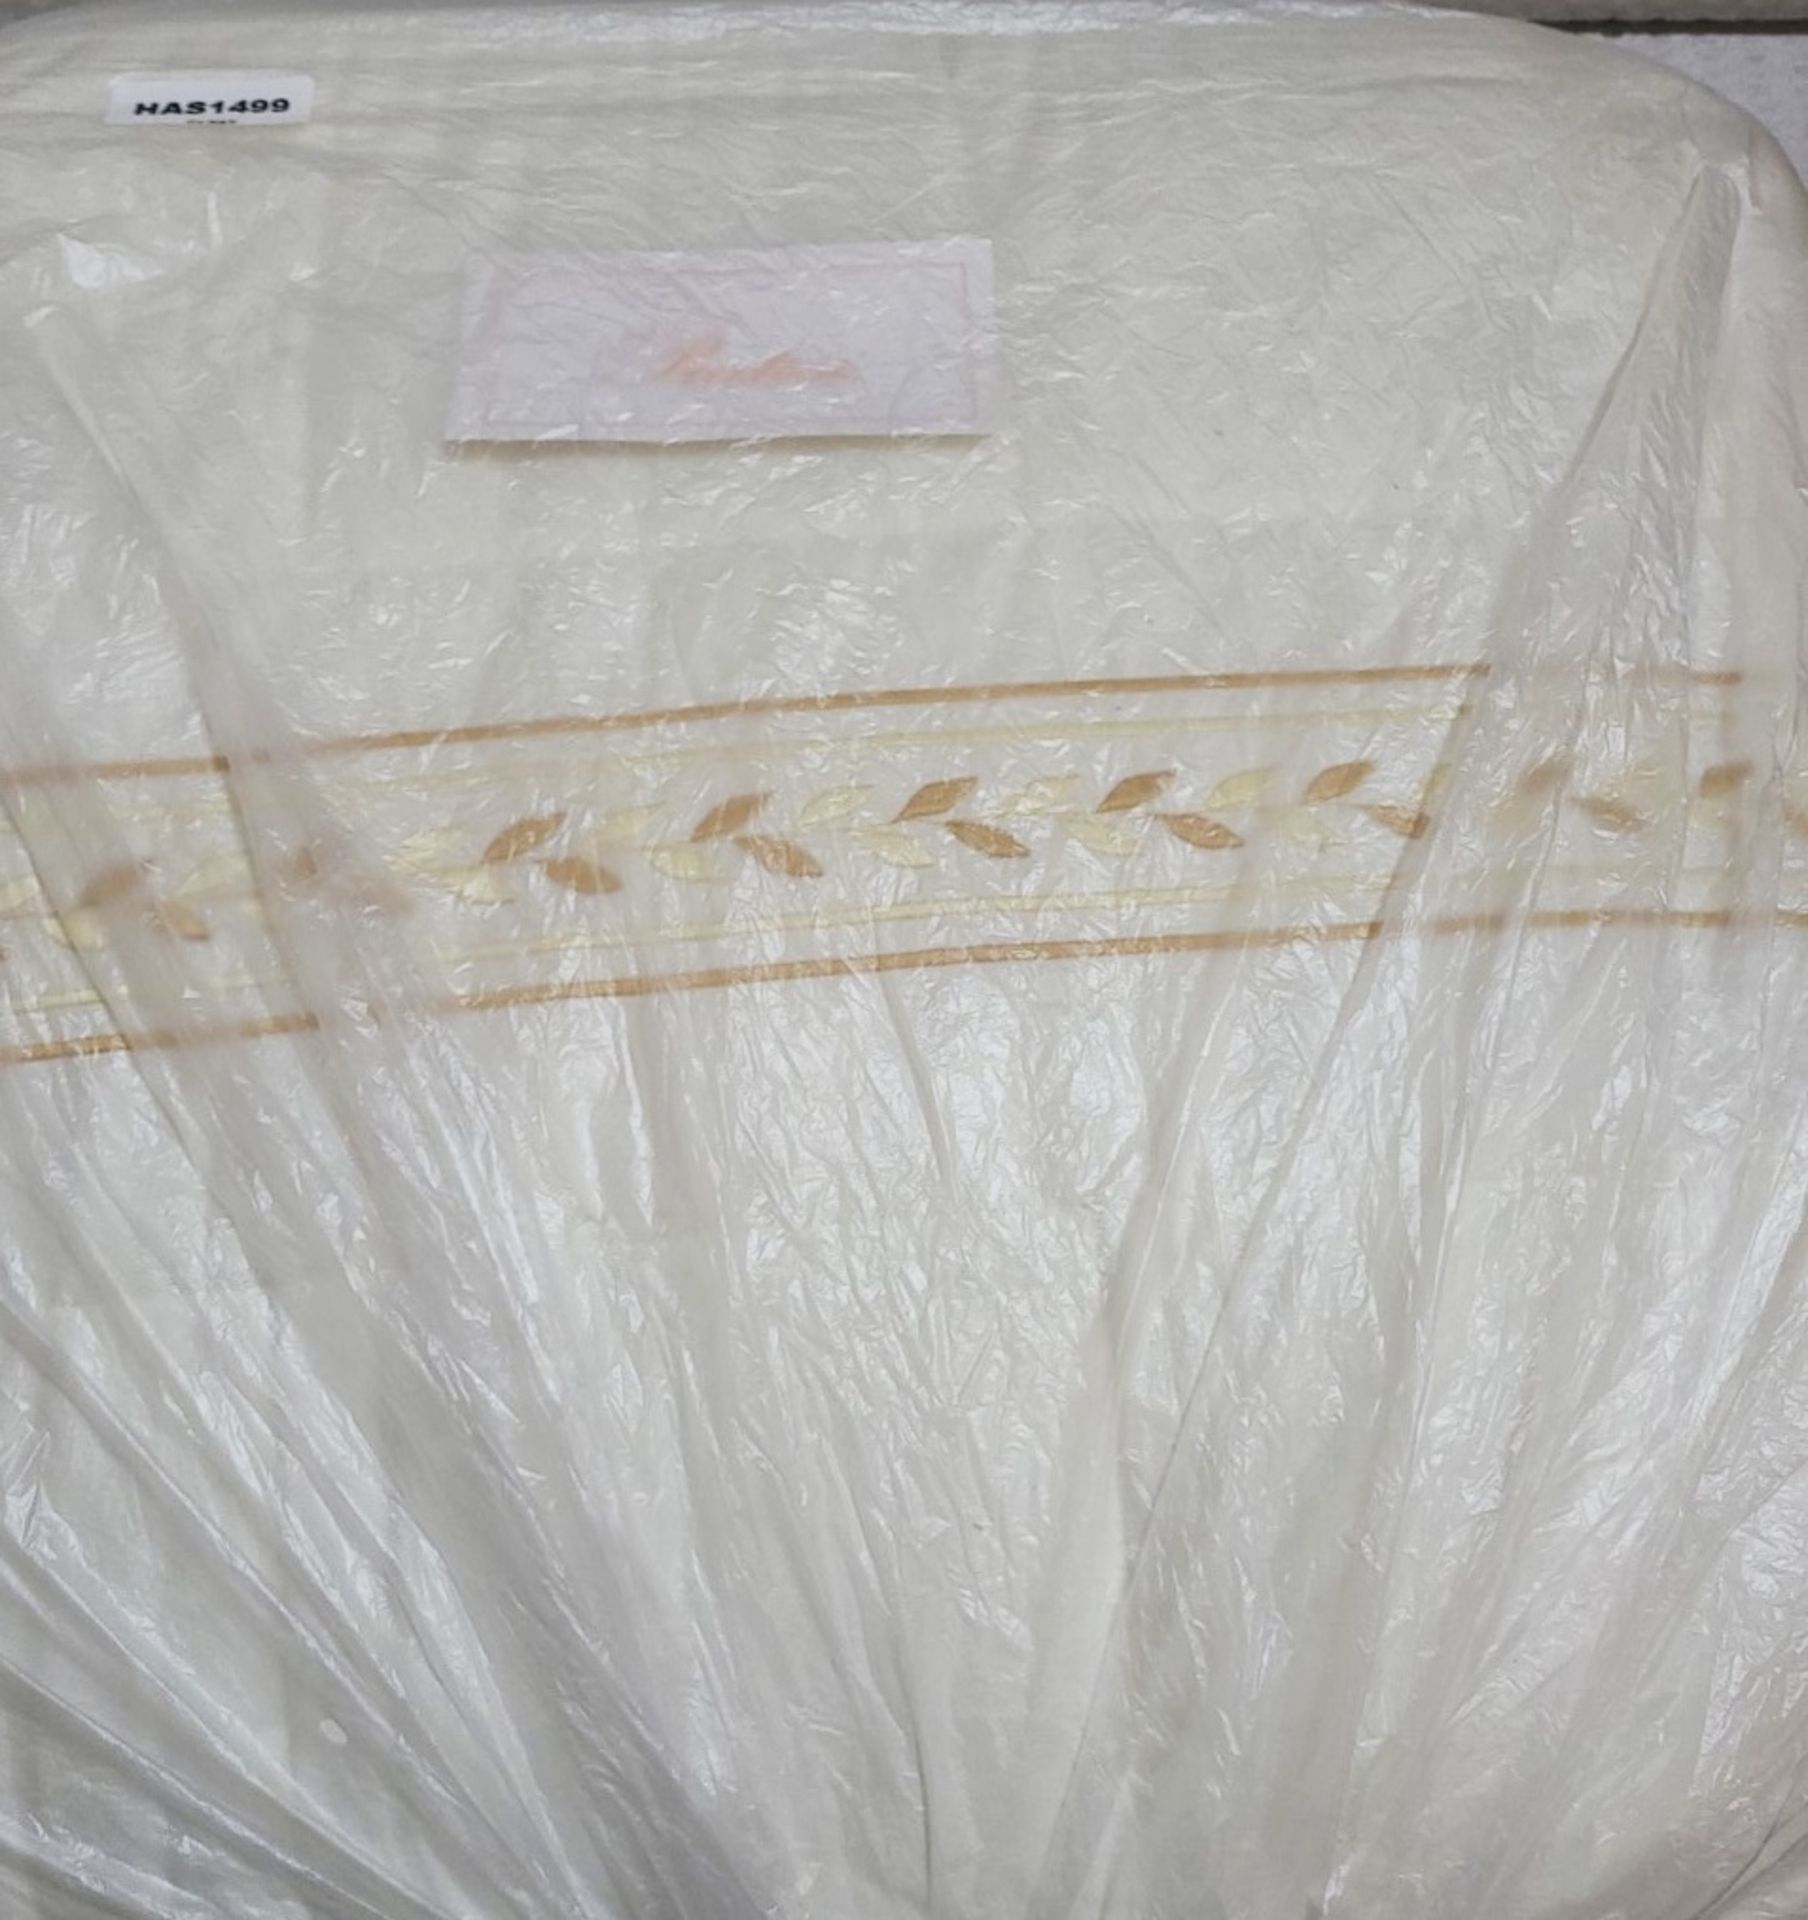 1 x PRATESI 'Impero' Luxury Italian Angel Skin Cotton Quilt Featuring Gold Embroidery - RRP £1,580 - Image 2 of 5